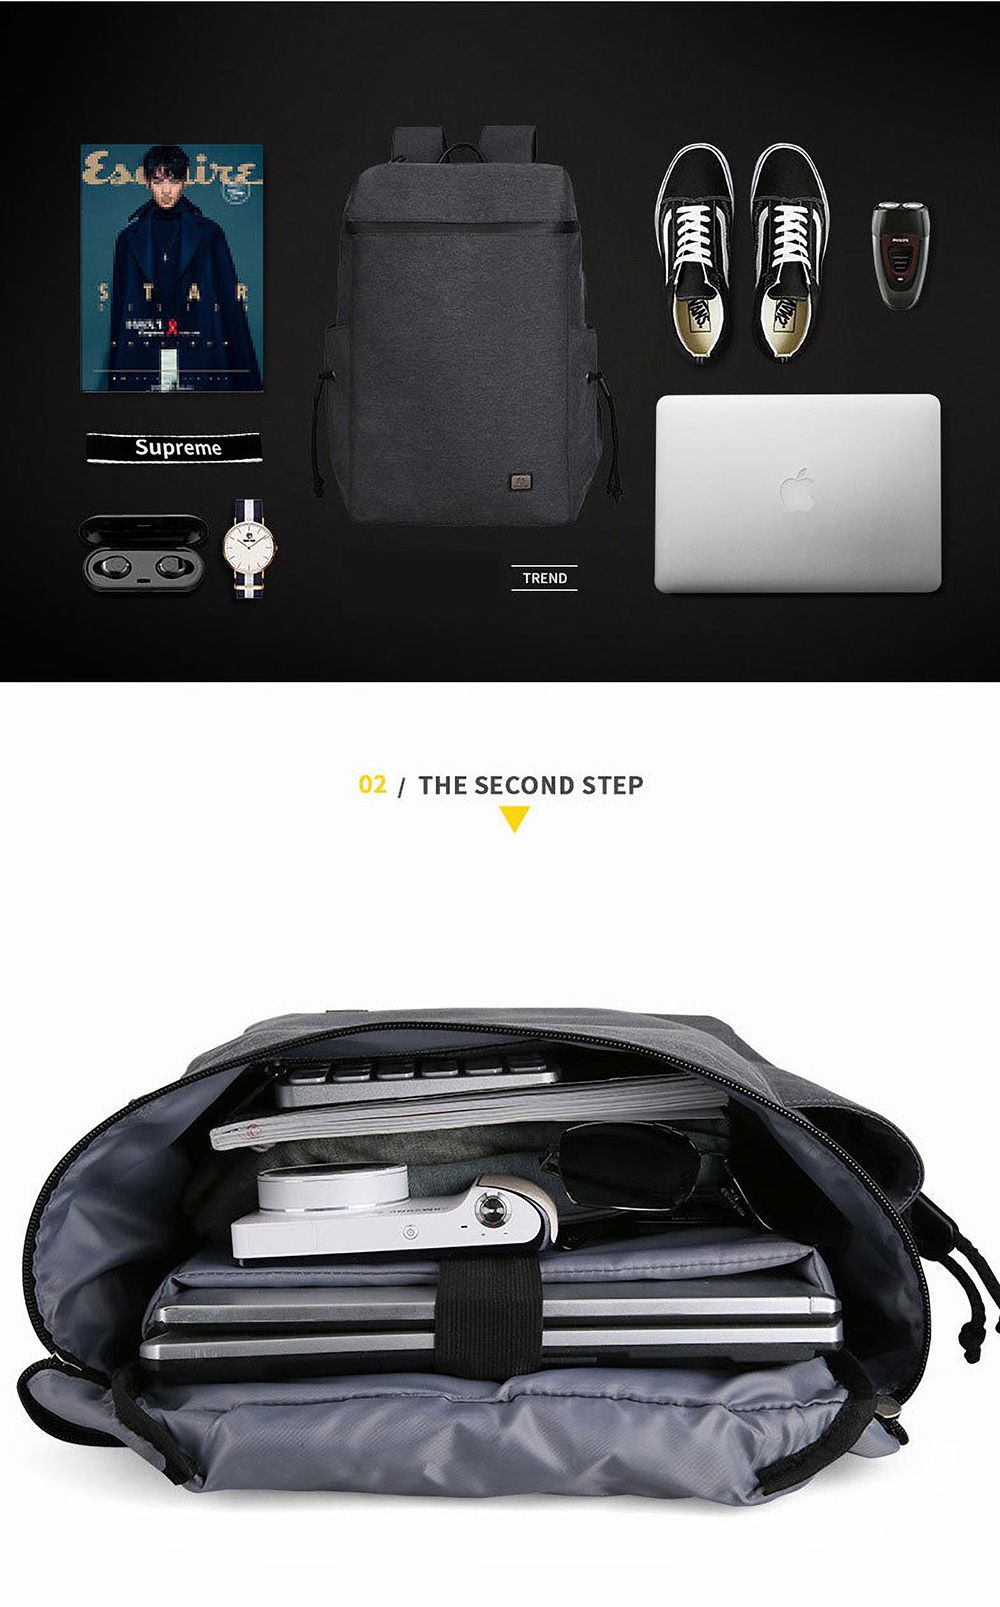 Mazzy-Star-Laptop-Bag-Multifunction-Backpack-with-USB-Charging-Port-Travel-Bag-Water-Resistant-Casua-1546287